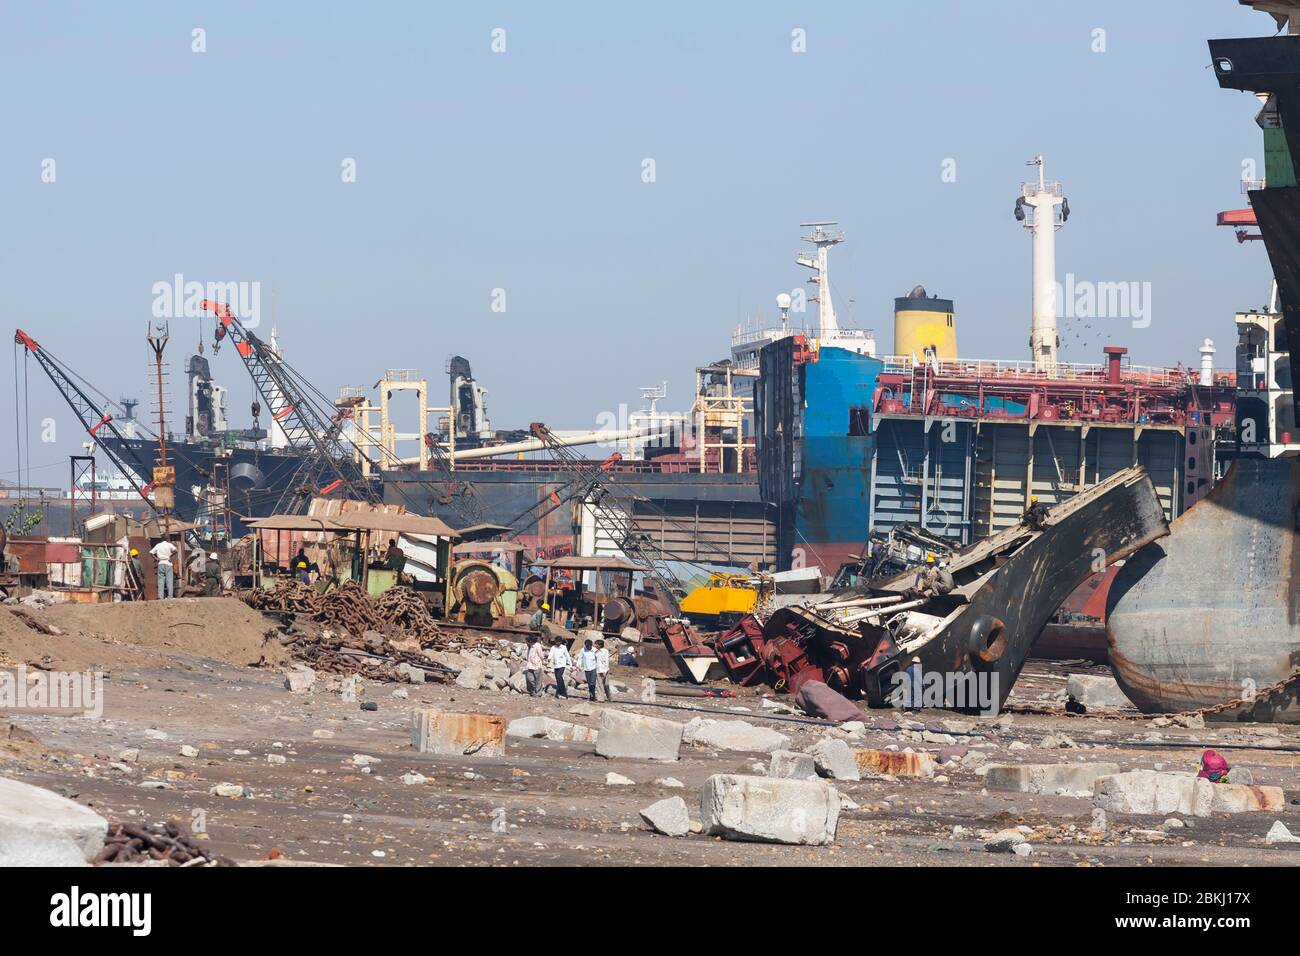 India, Gujarat State, near Bhavnagar, Alang shipyards, beach used to dismantle reformed ships, men at work Stock Photo